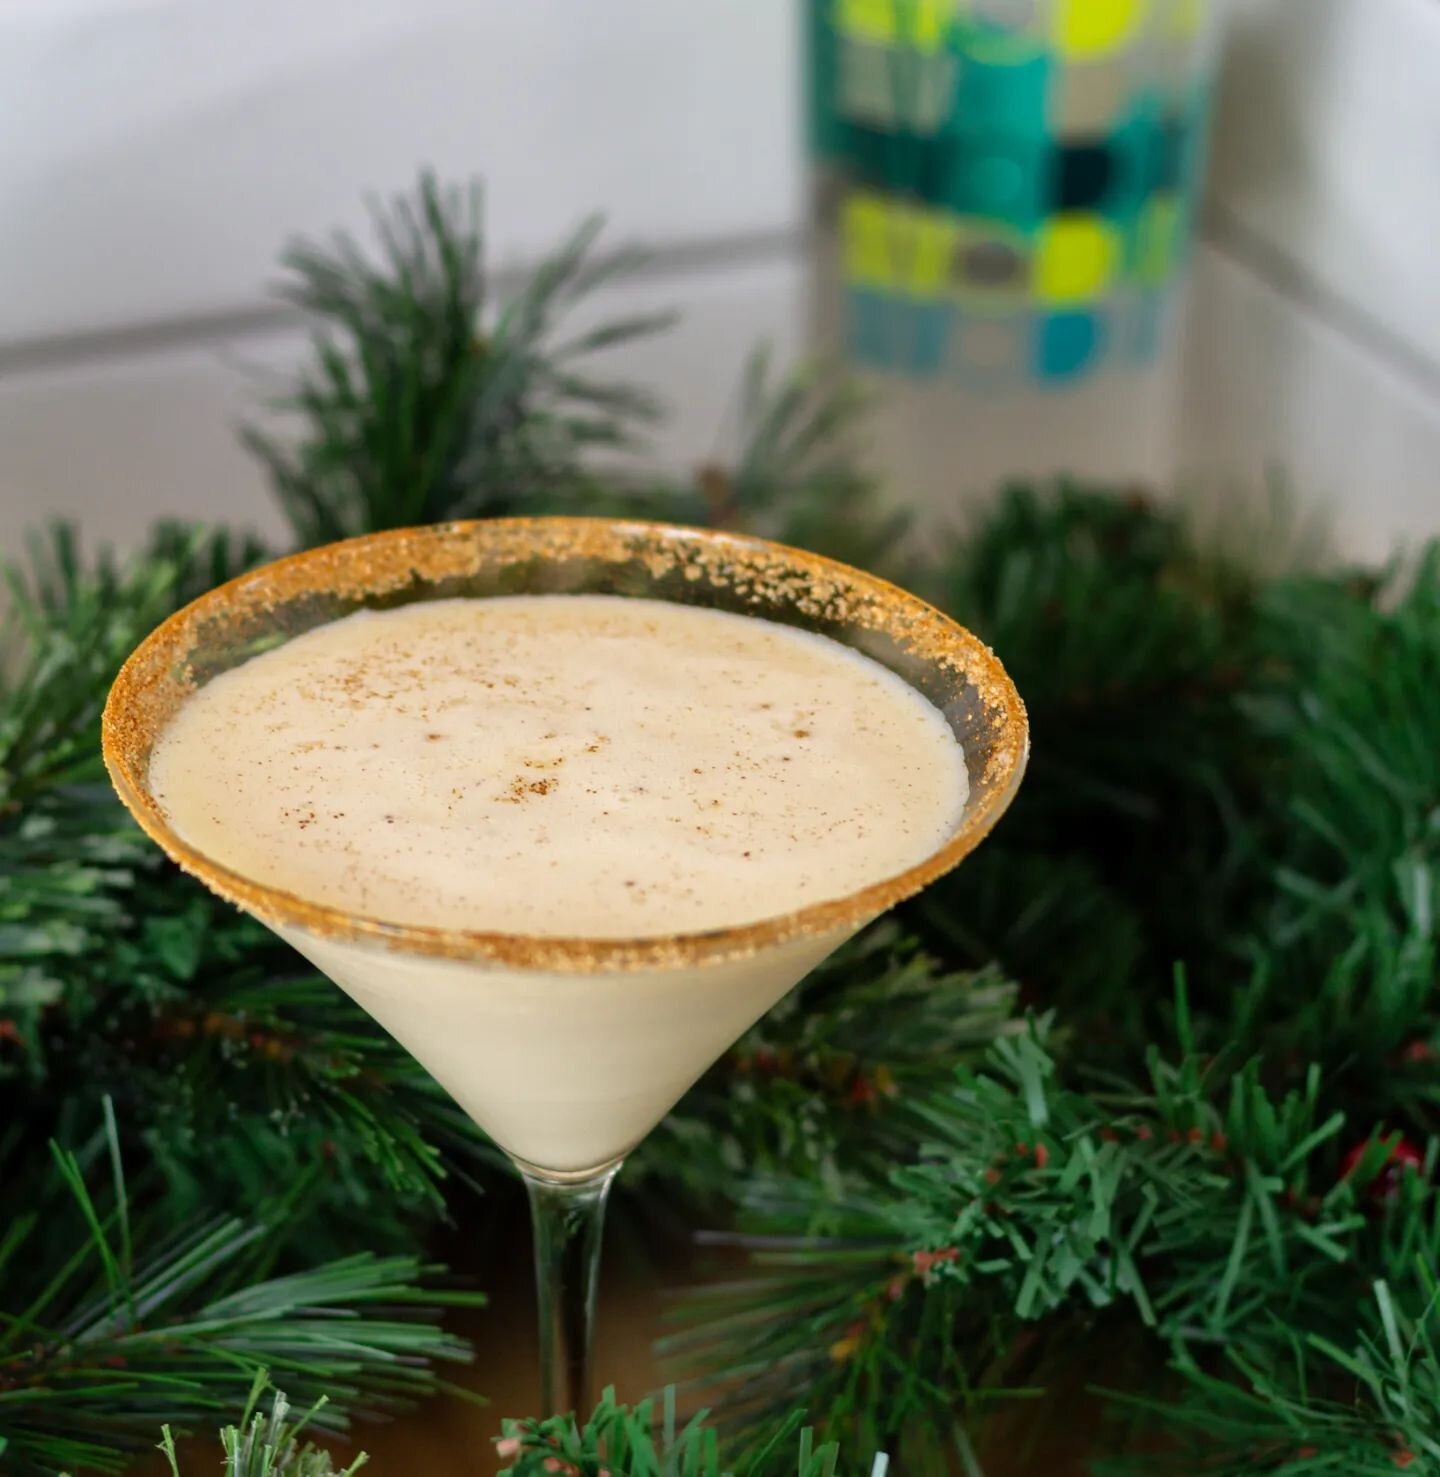 Merry Christmas!  We've got an easy and festive cocktail recipe to get you into the Christmas spirit! 

Hotcha Eggnog Martini

3 oz of your favorite eggnog
2 oz of Hotcha Vodka

Add the eggnog and Hotcha Vodka to a shaker filled with ice. Shake vigor